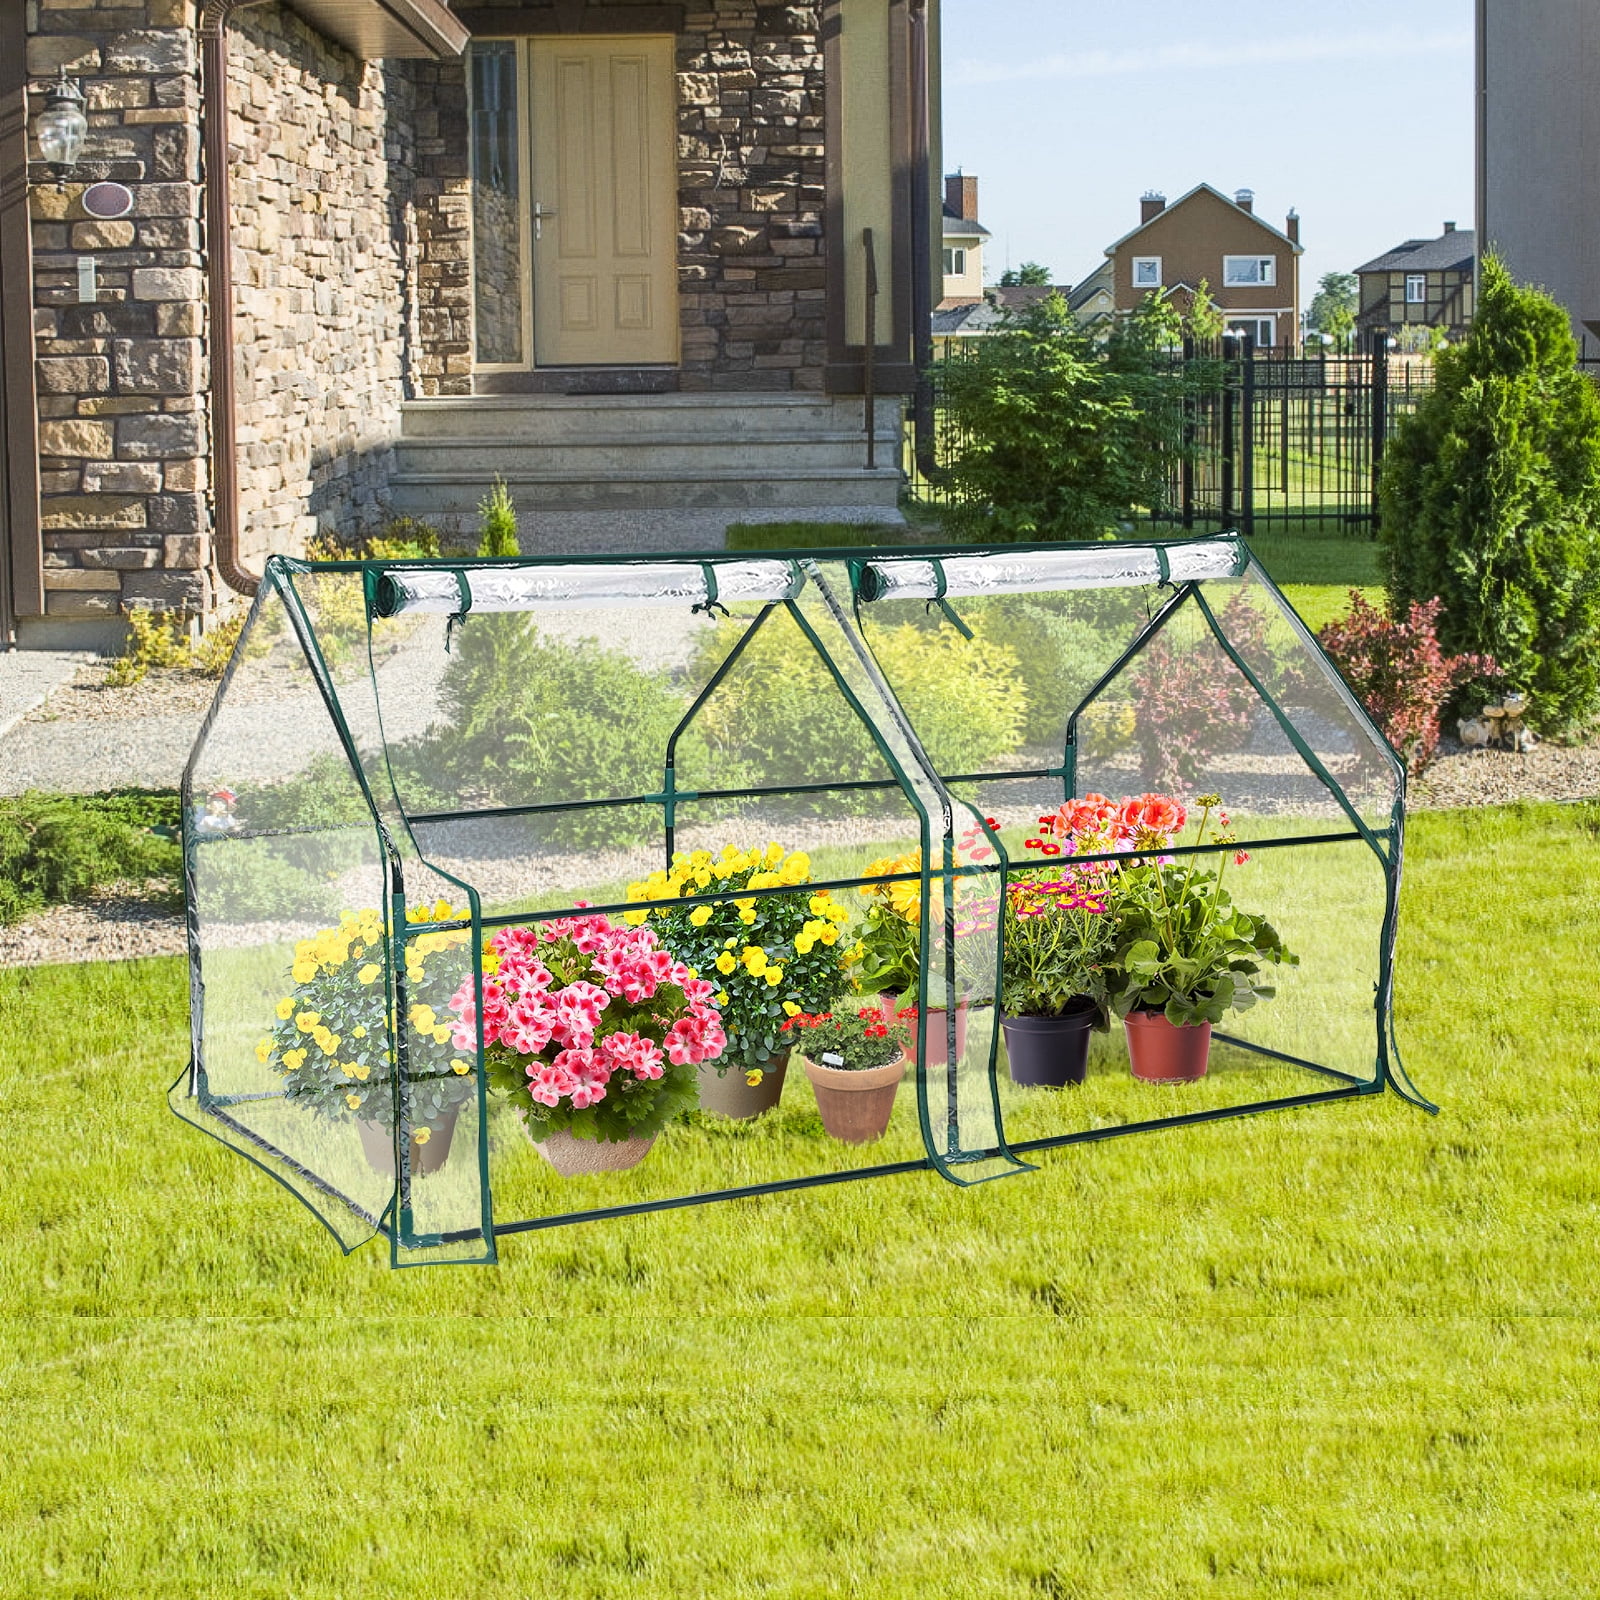 Outdoor Garden Portable PVC Greenhouse w/ Steel Frame for Growing Plants Flowers